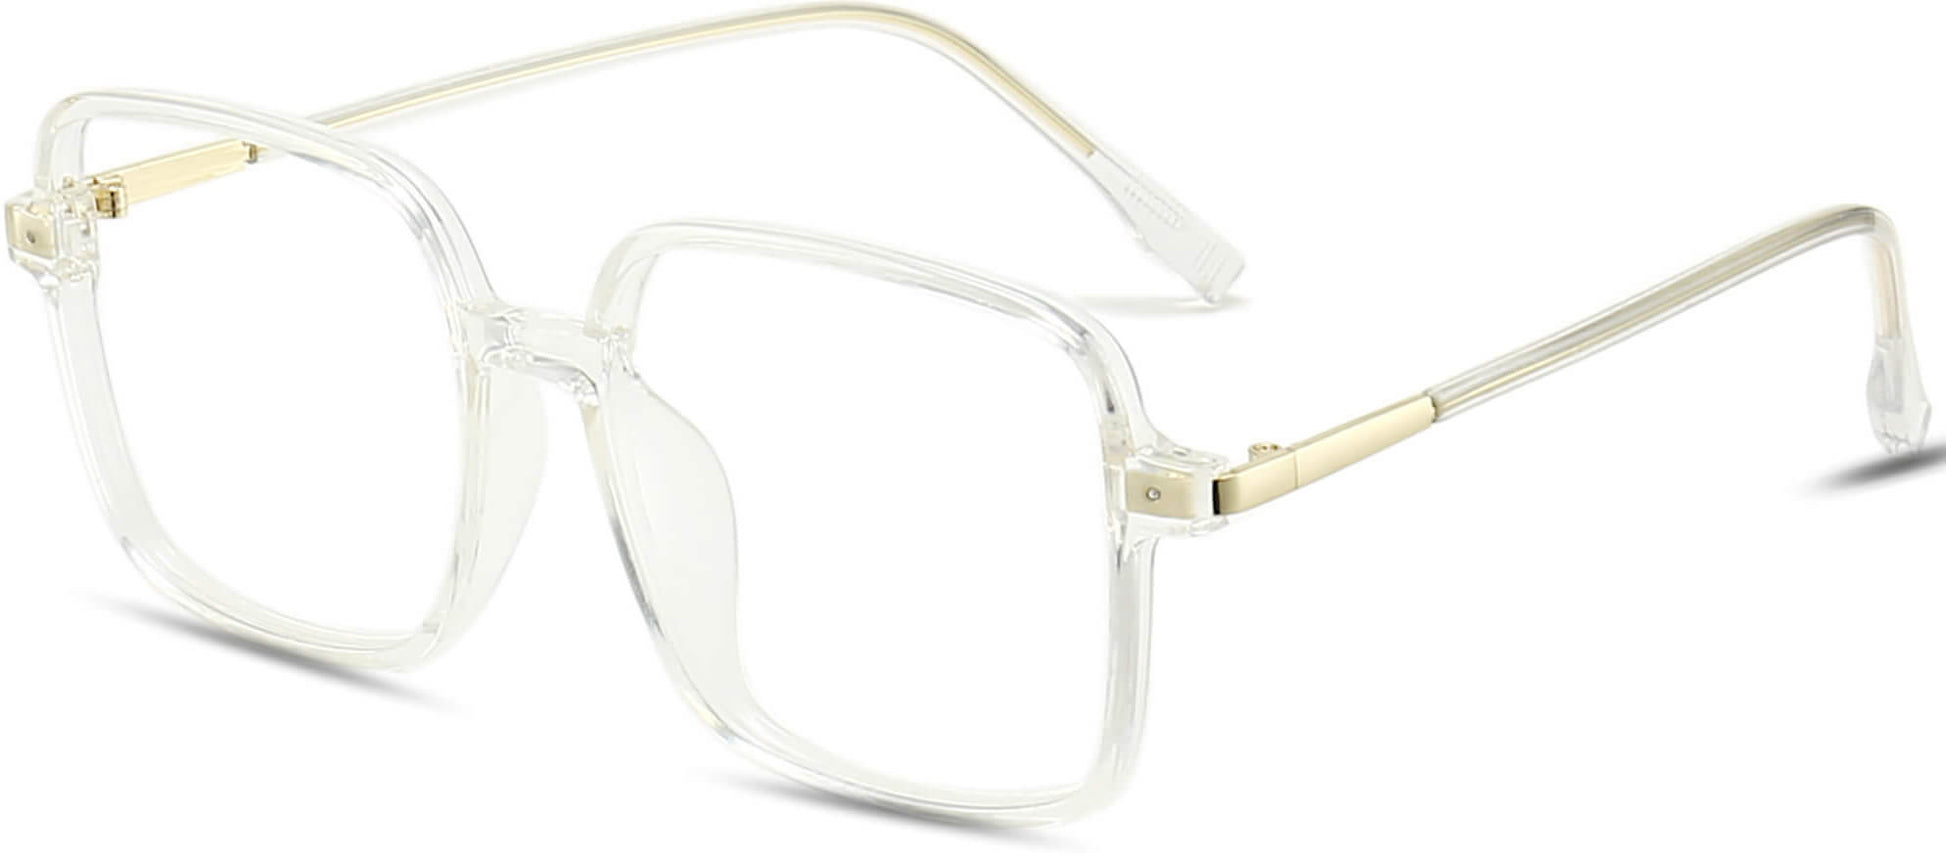 Amara Square Clear Eyeglasses from ANRRI, angle view